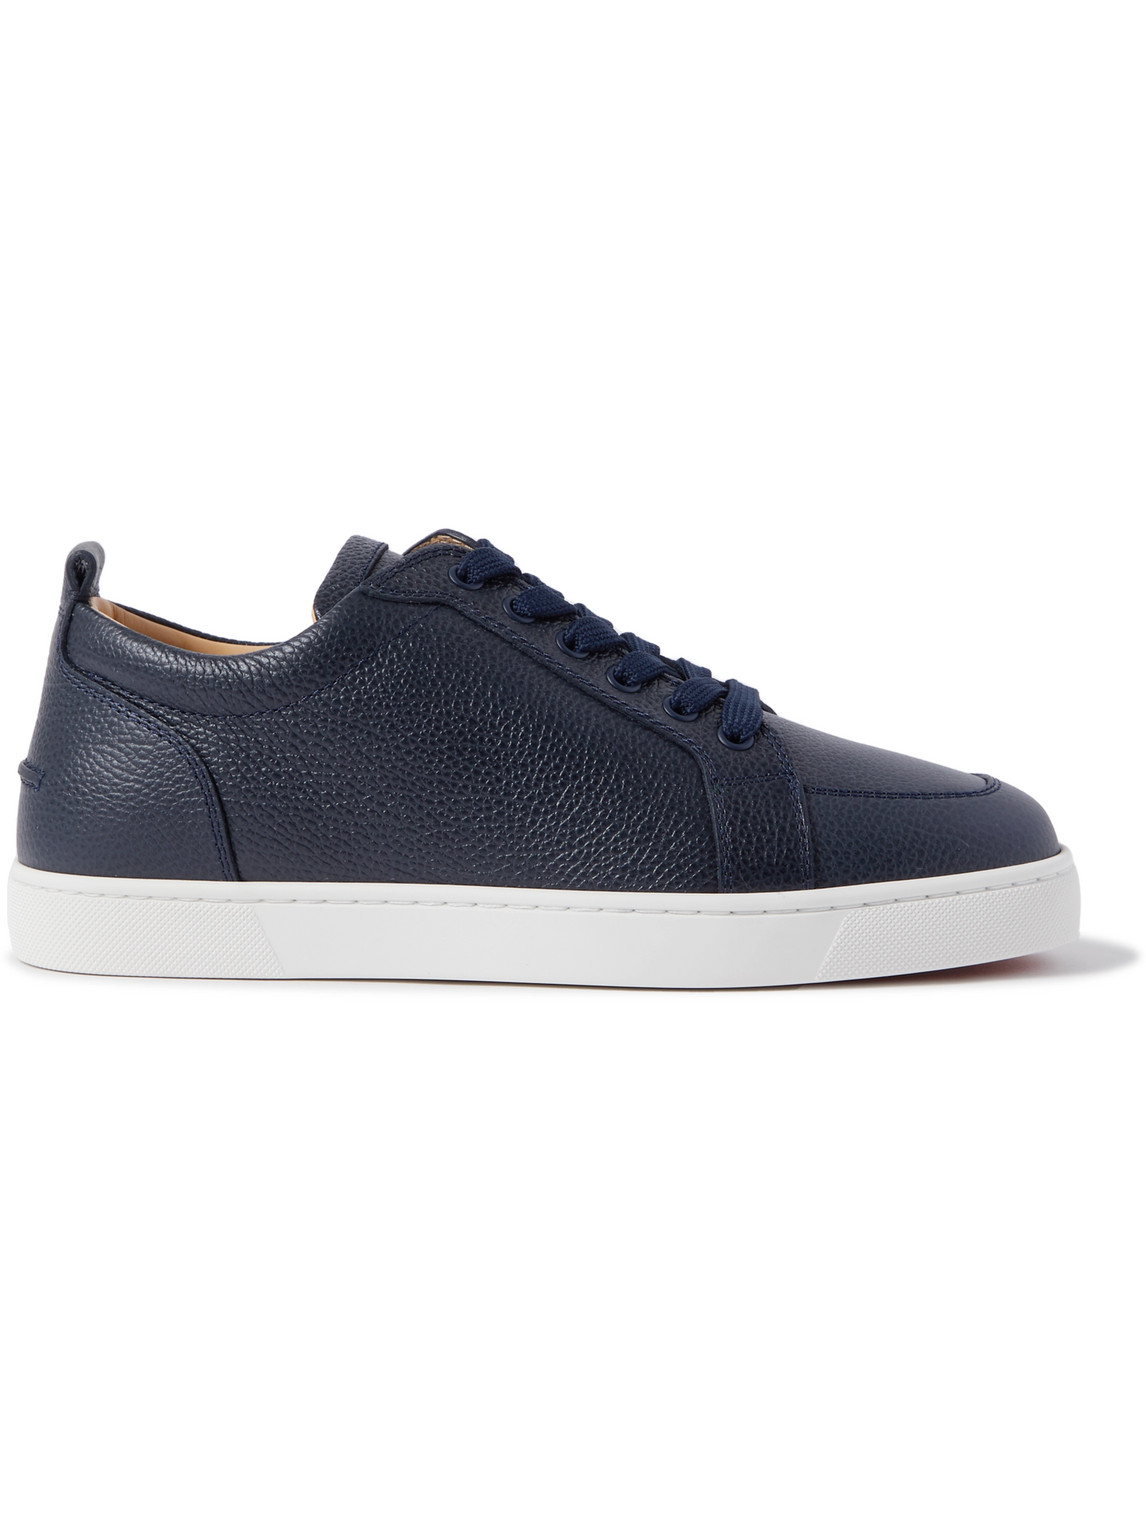 Christian Louboutin Rantulow Suede Sneakers In Nocolor